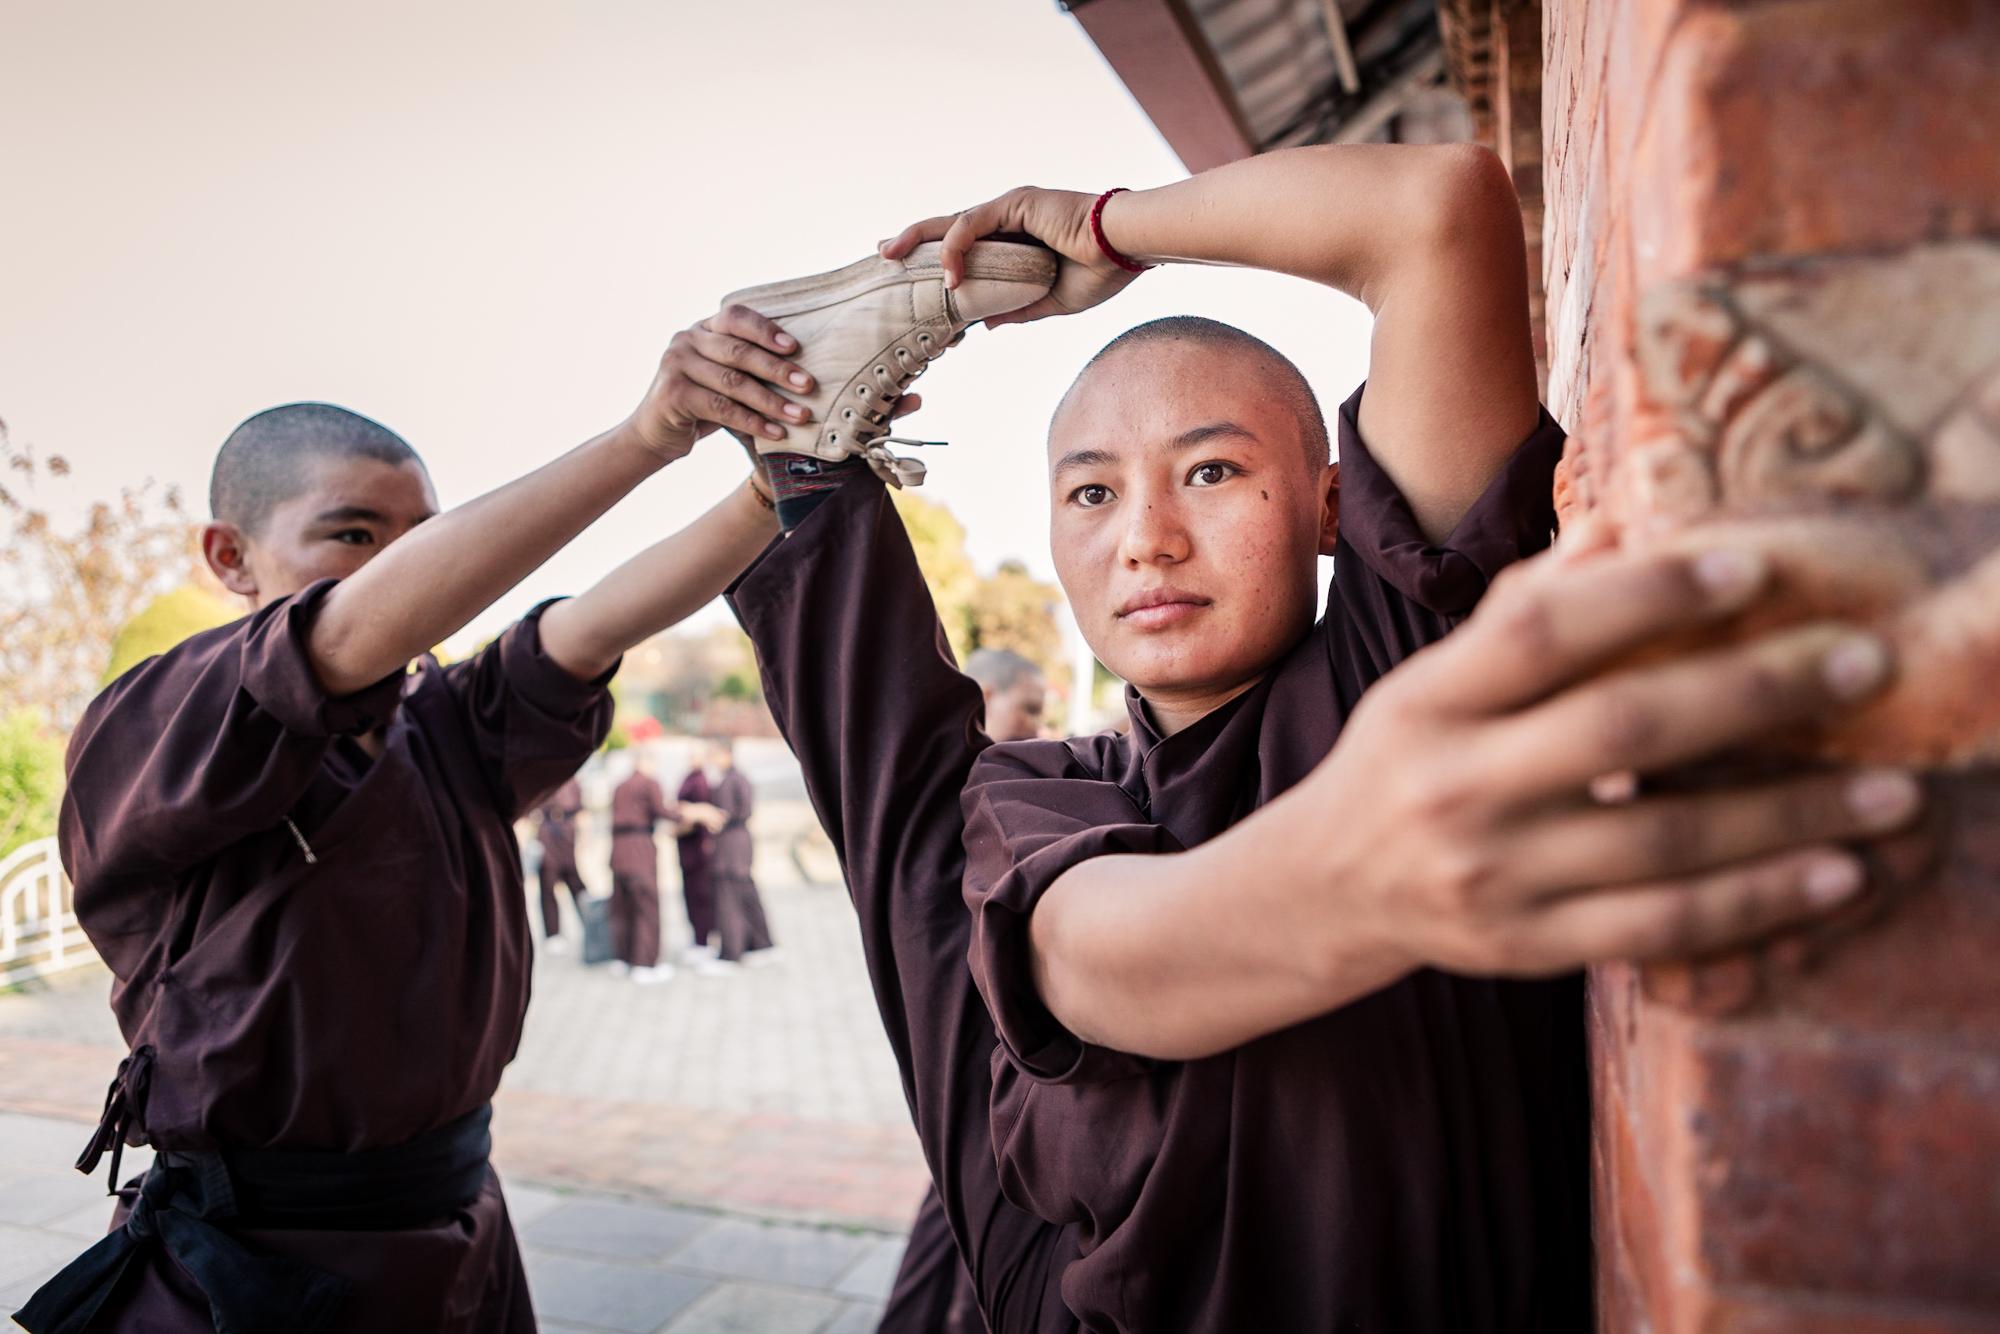 THE KUNG FU NUNS OF THE HIMALAYAS  - Jigme Jangchub Chosdon (right),18, pictured during Kung...